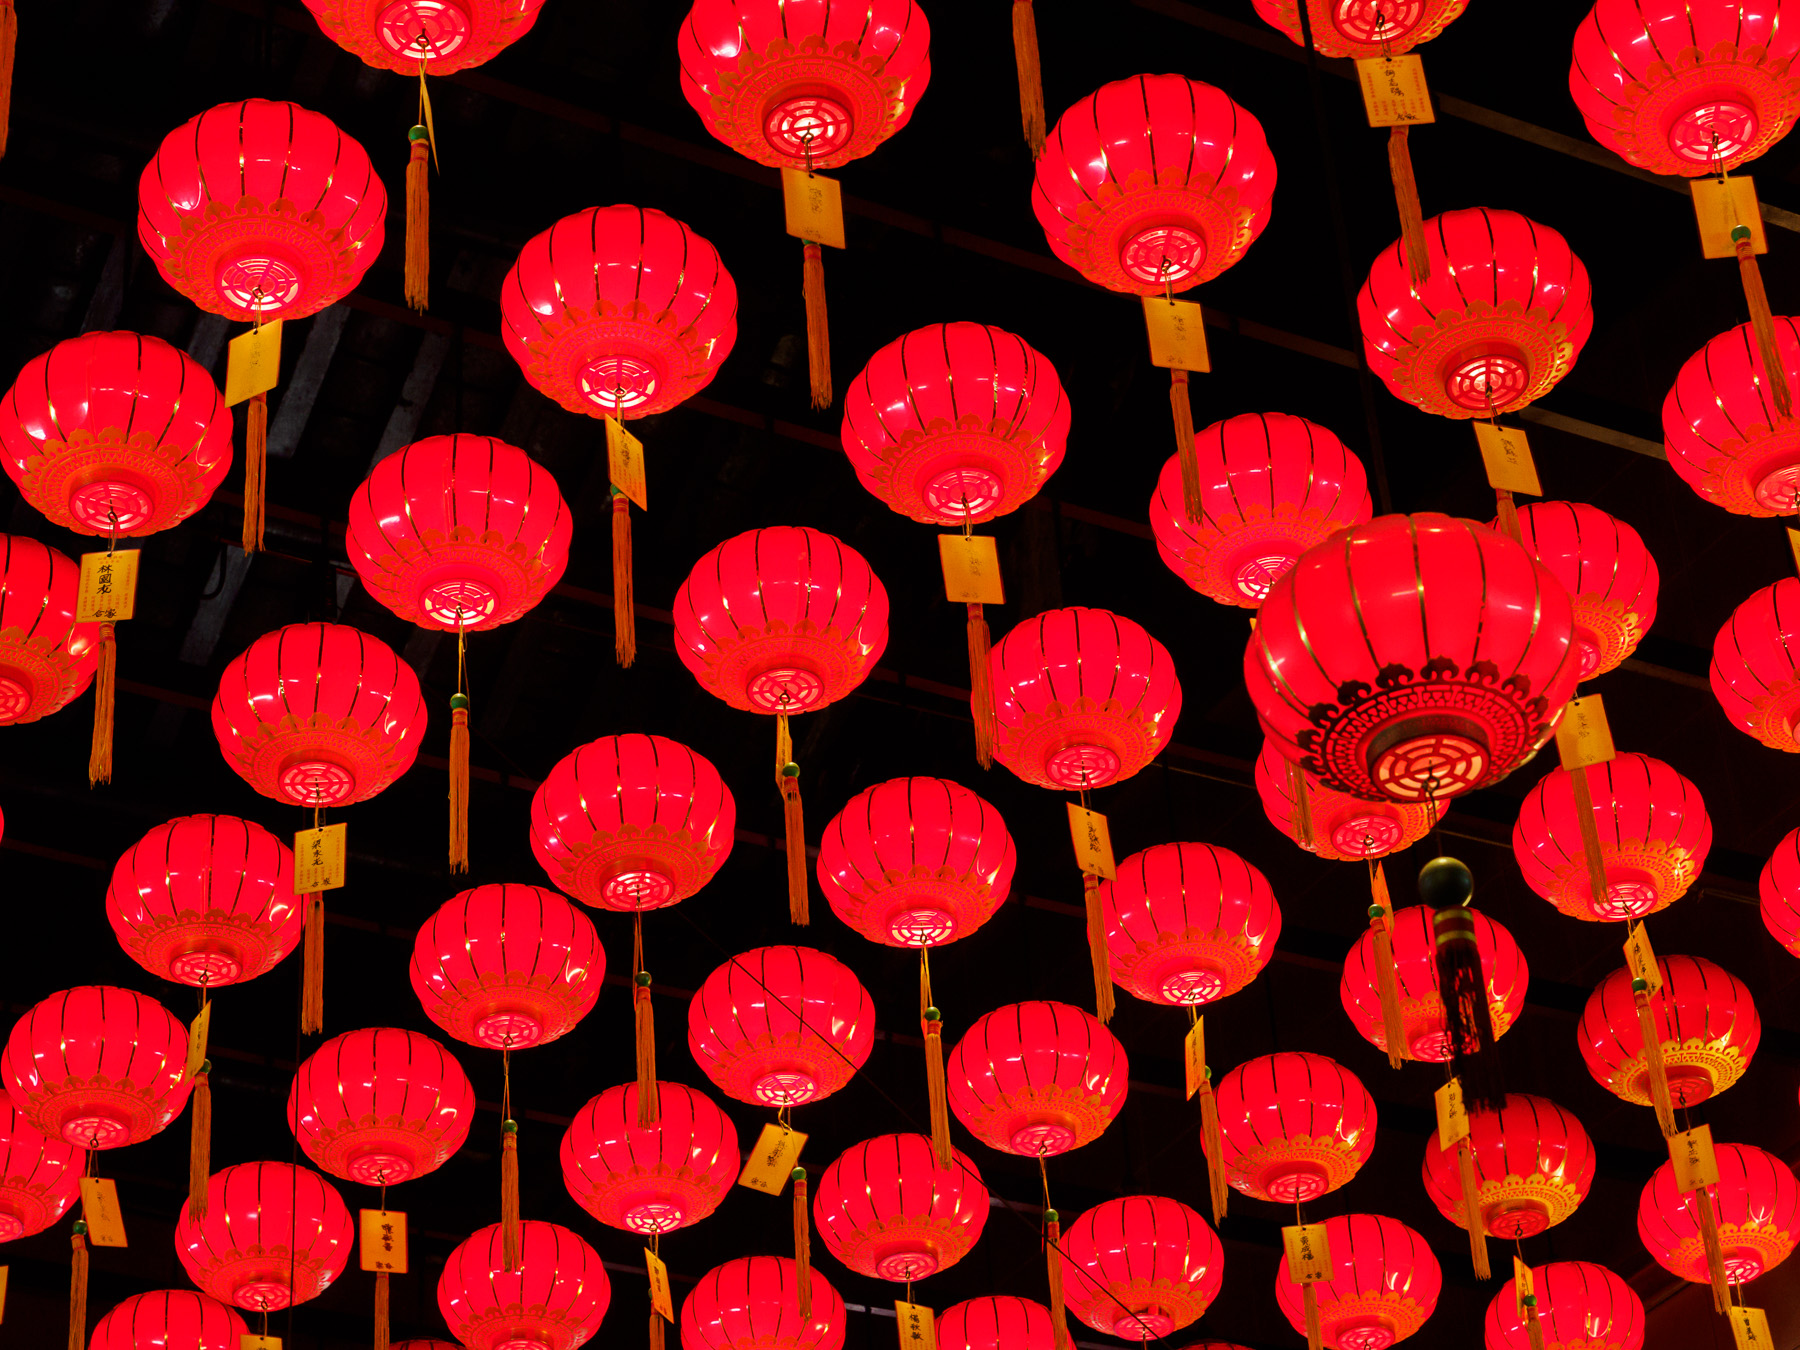 Red lanterns decorating a Chinese temple in Georgetown, Penang, for Chinese New Year